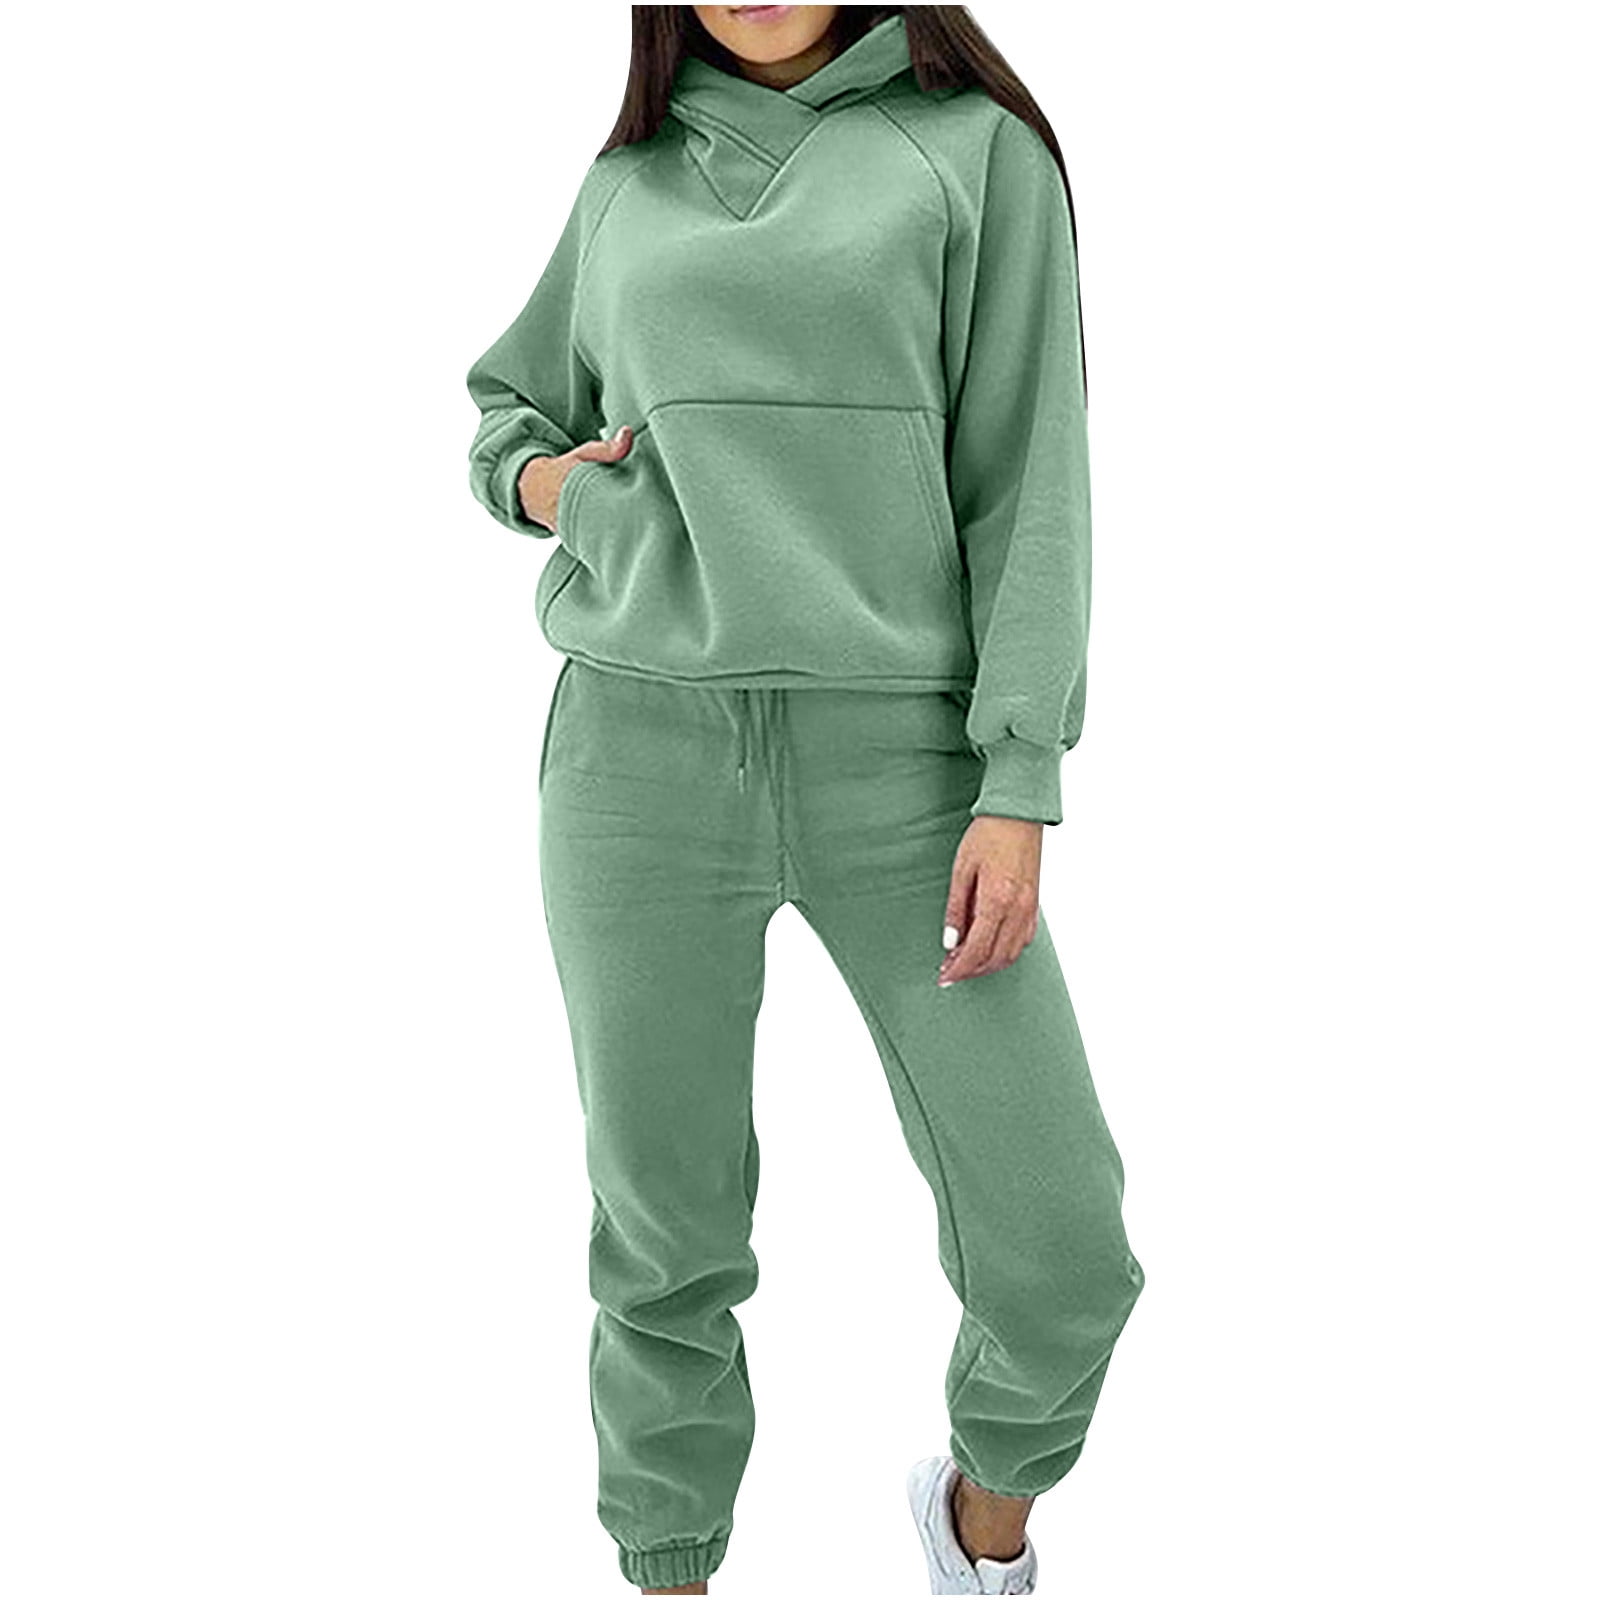 Tracksuit Womens Full Set Sale Clearance,Ladies Hoodies and